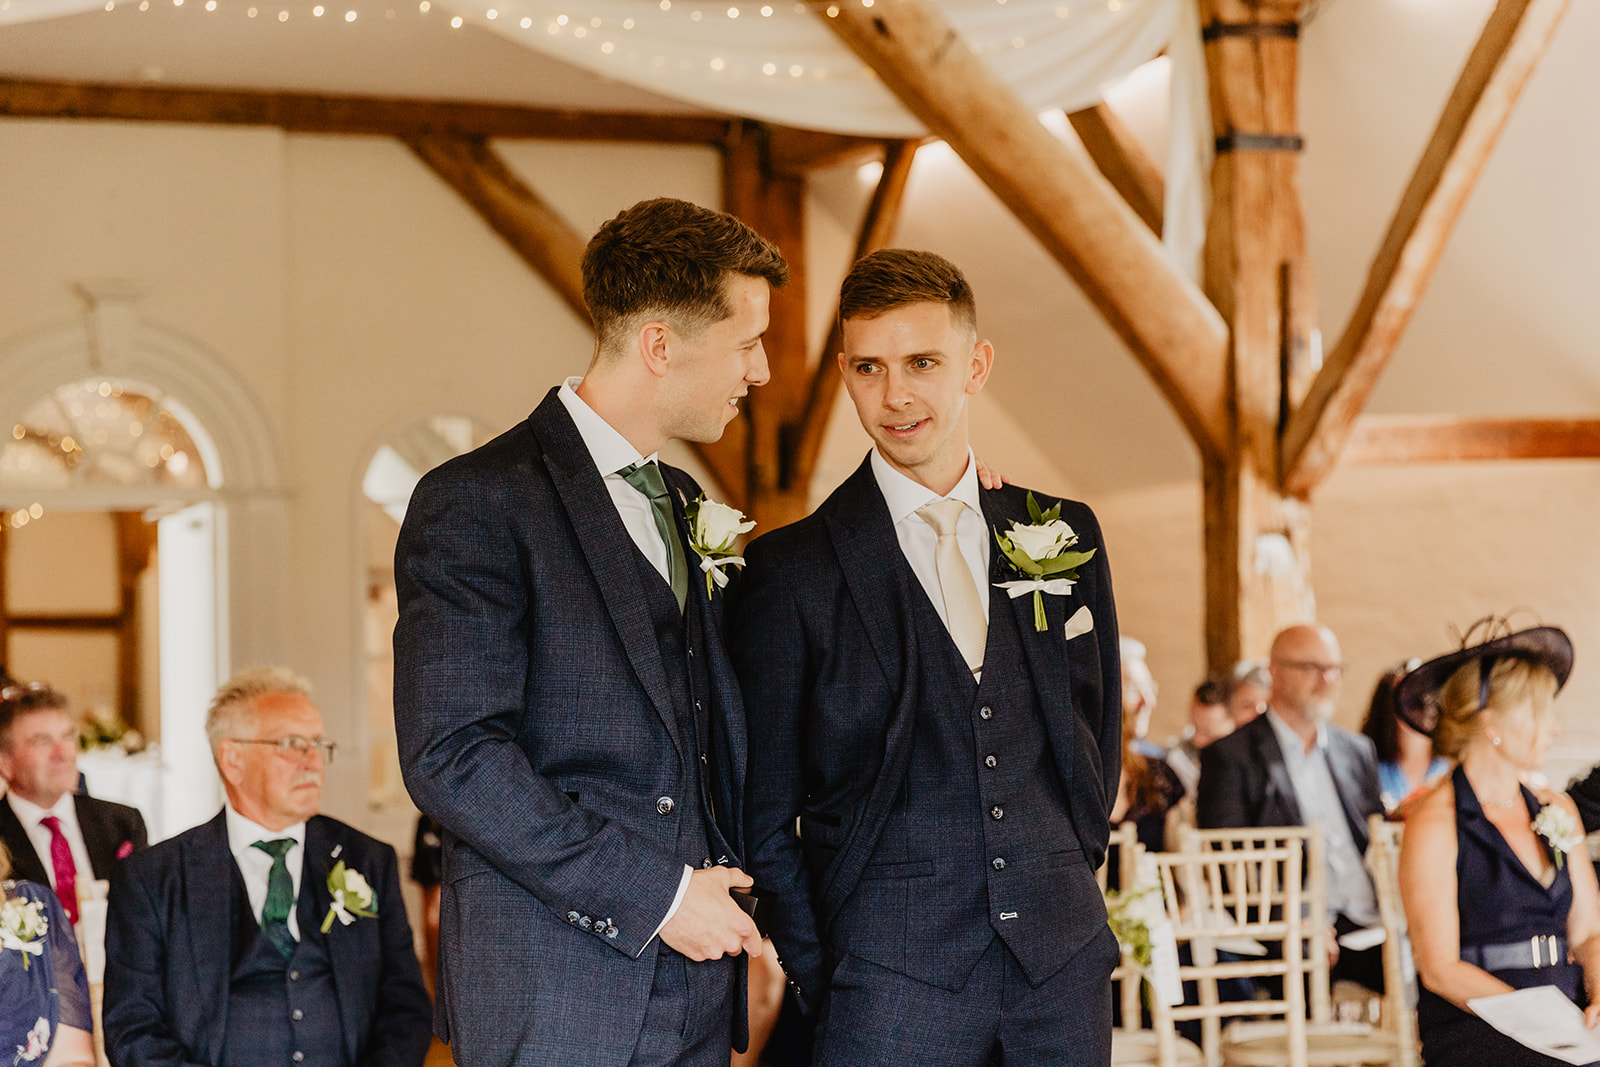 Groom awaiting bride at a Bury Manor Barn Wedding in Sussex. Photographer OliveJoy Photography.